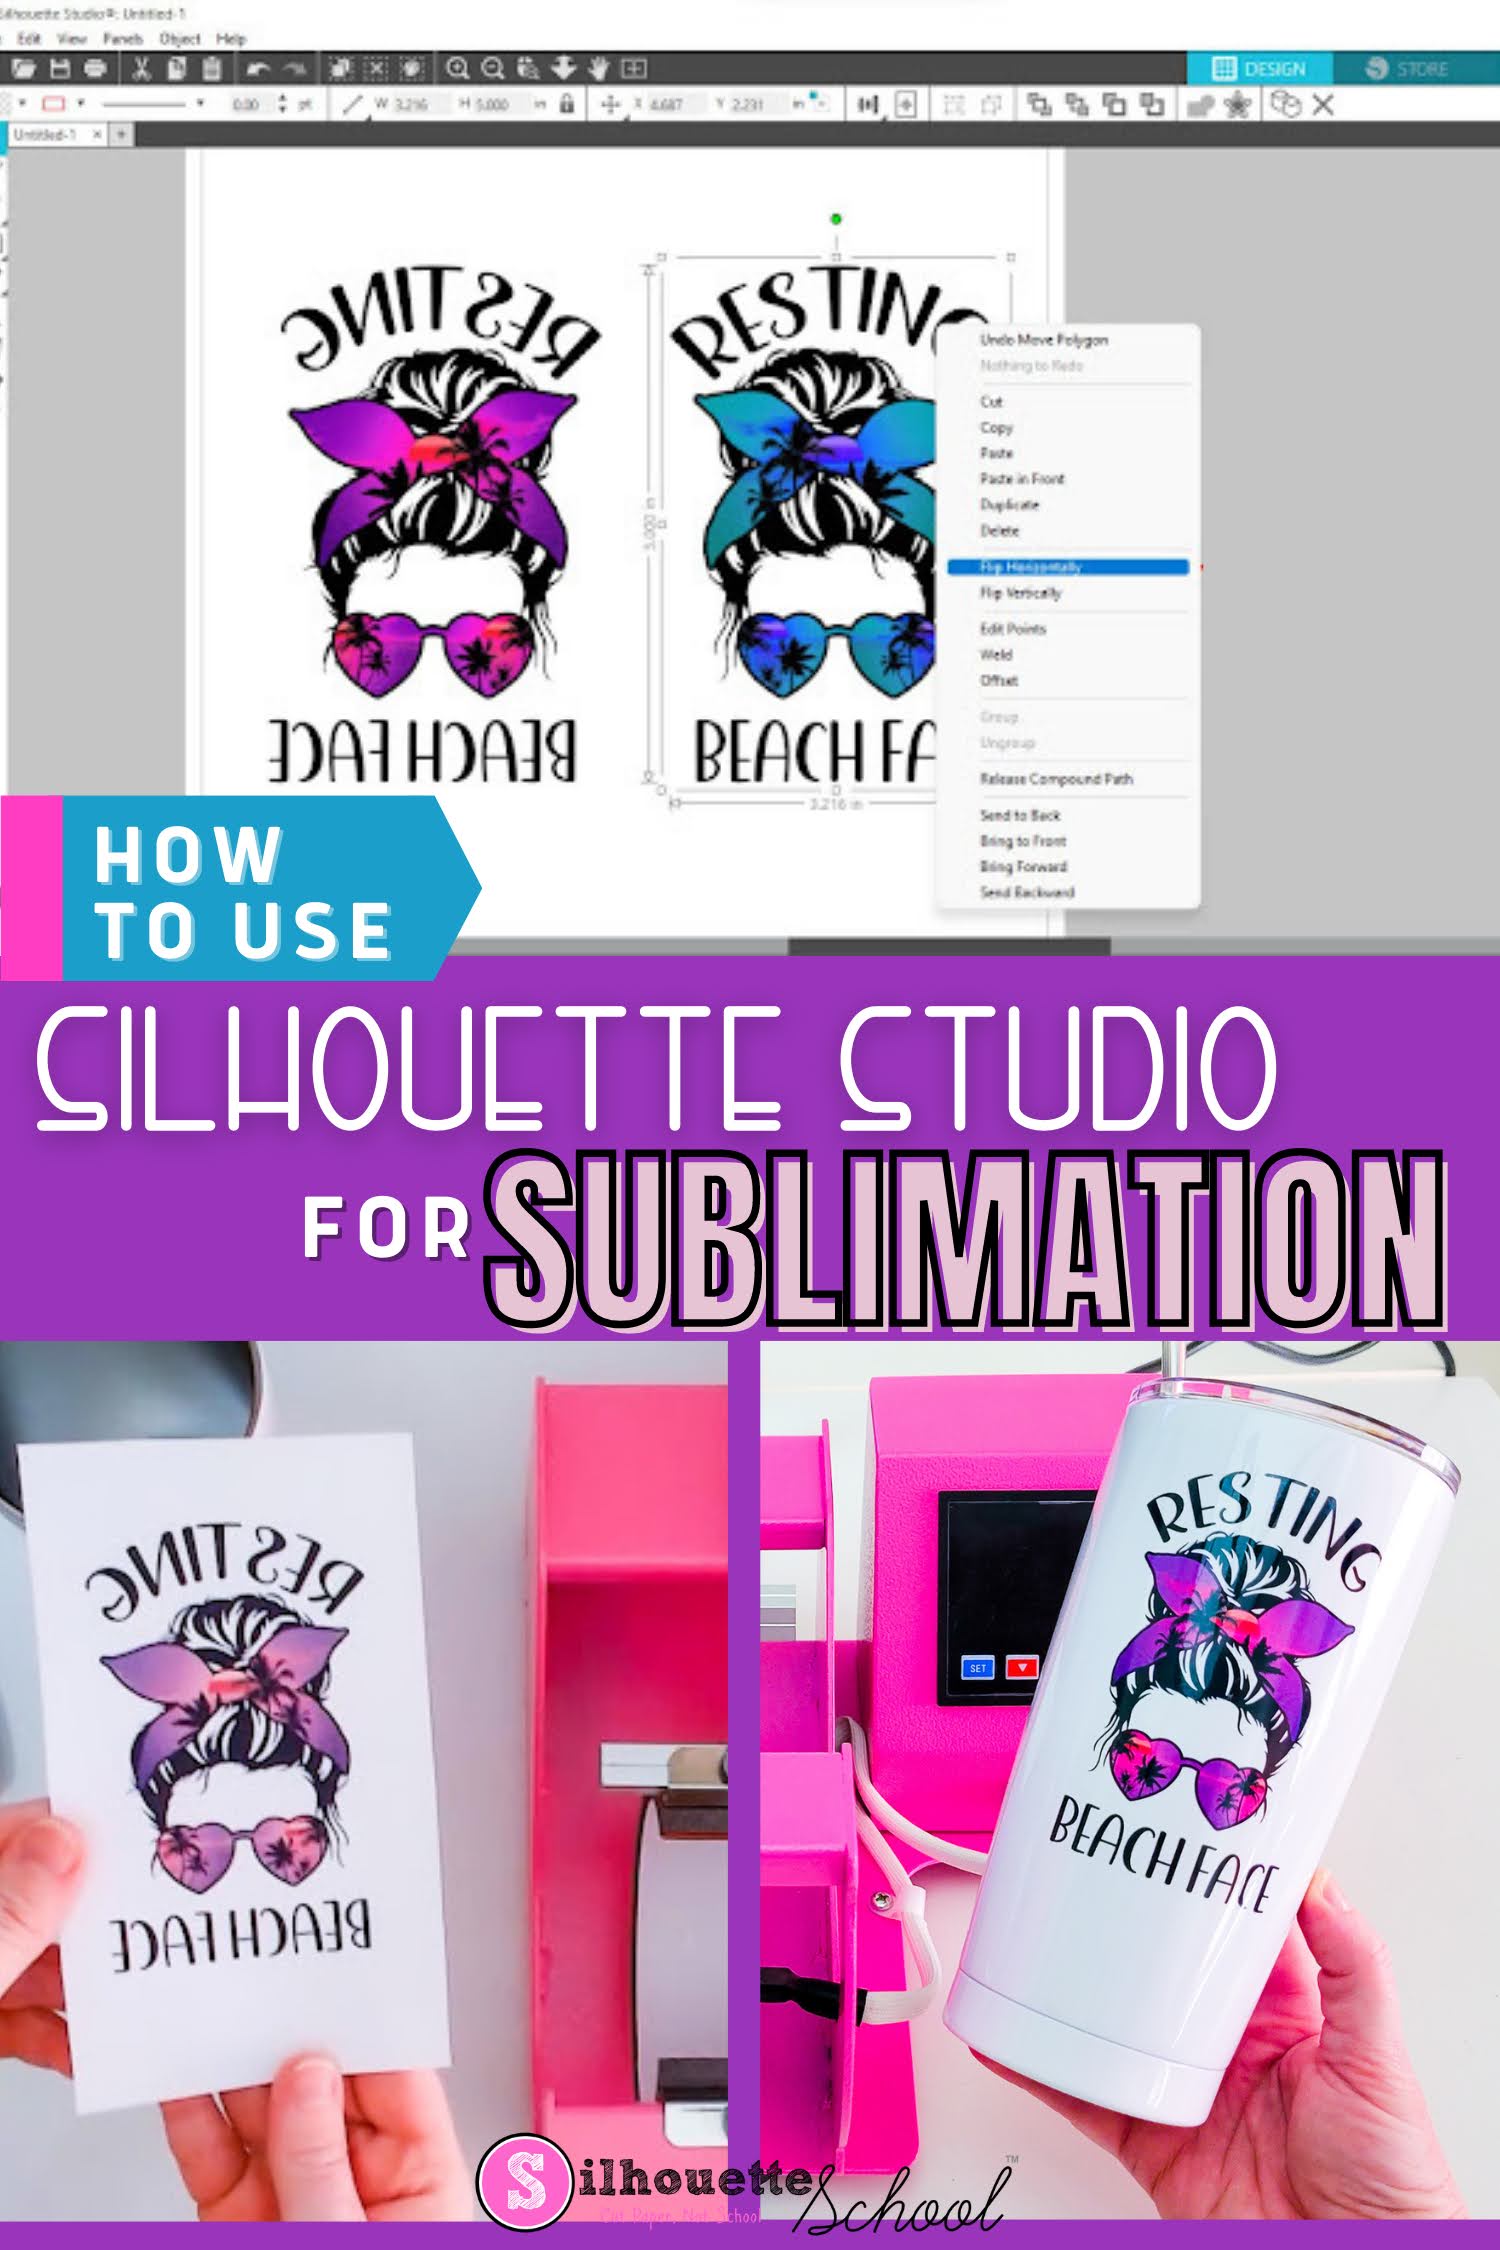 Sublimation Made Simple for Cricut Crafters - Well Crafted Studio